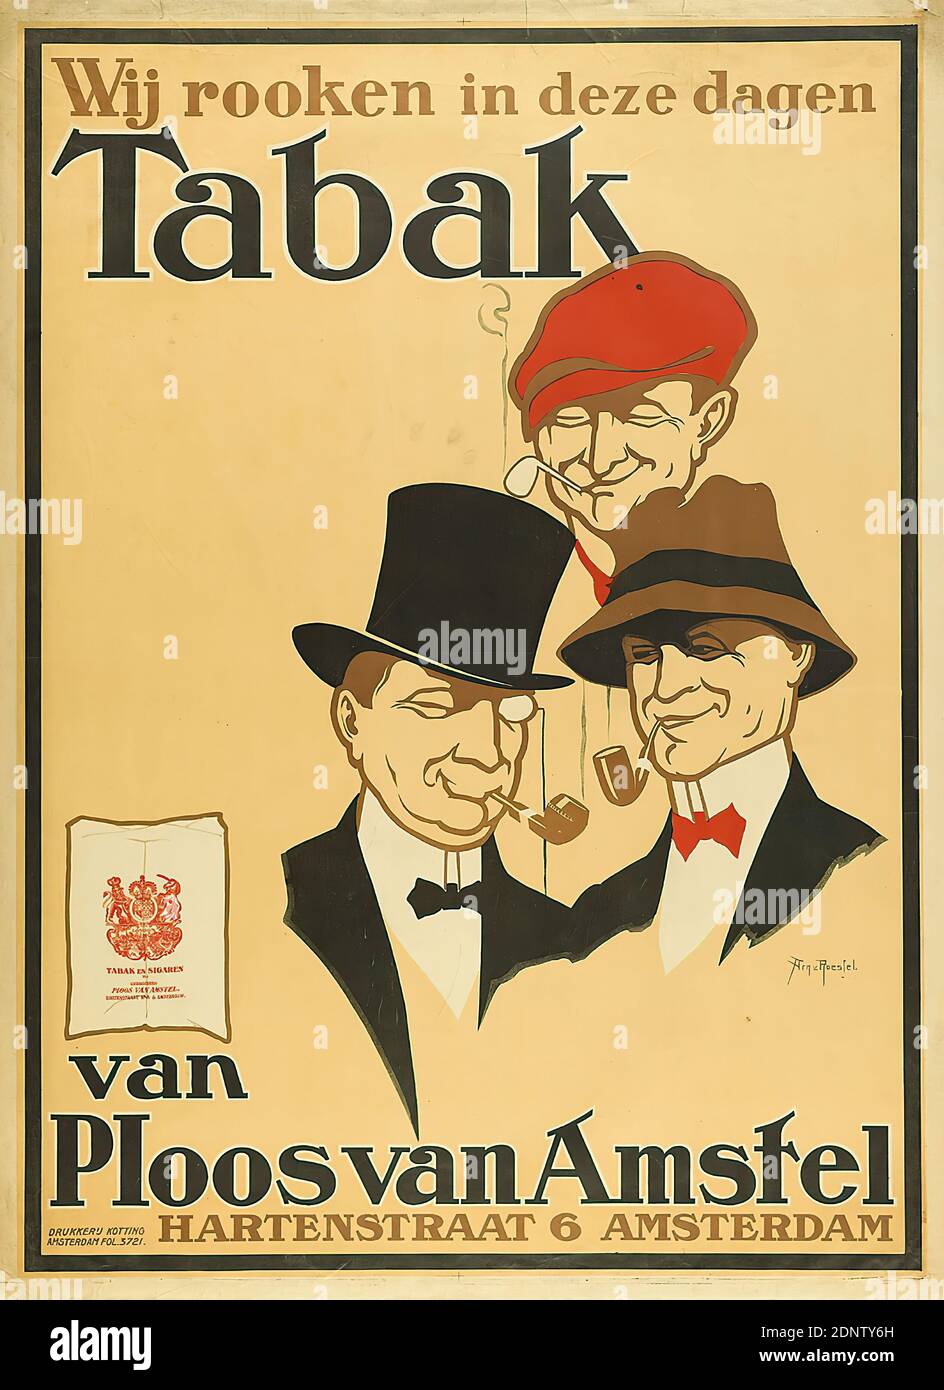 Arnold van Roessel, Drukkerij Kotting, Wij rooken in deze dagen Tabak van Ploos van Amstel, lithography, Total: height: 110 cm; width: 80,6 cm, signed: in print bottom right: Arn. v. Roessel, product and business advertising (posters), advertising, billboard, hat, tobacco, cylinder, men's fashion, tobacco pipe, head, face Stock Photo